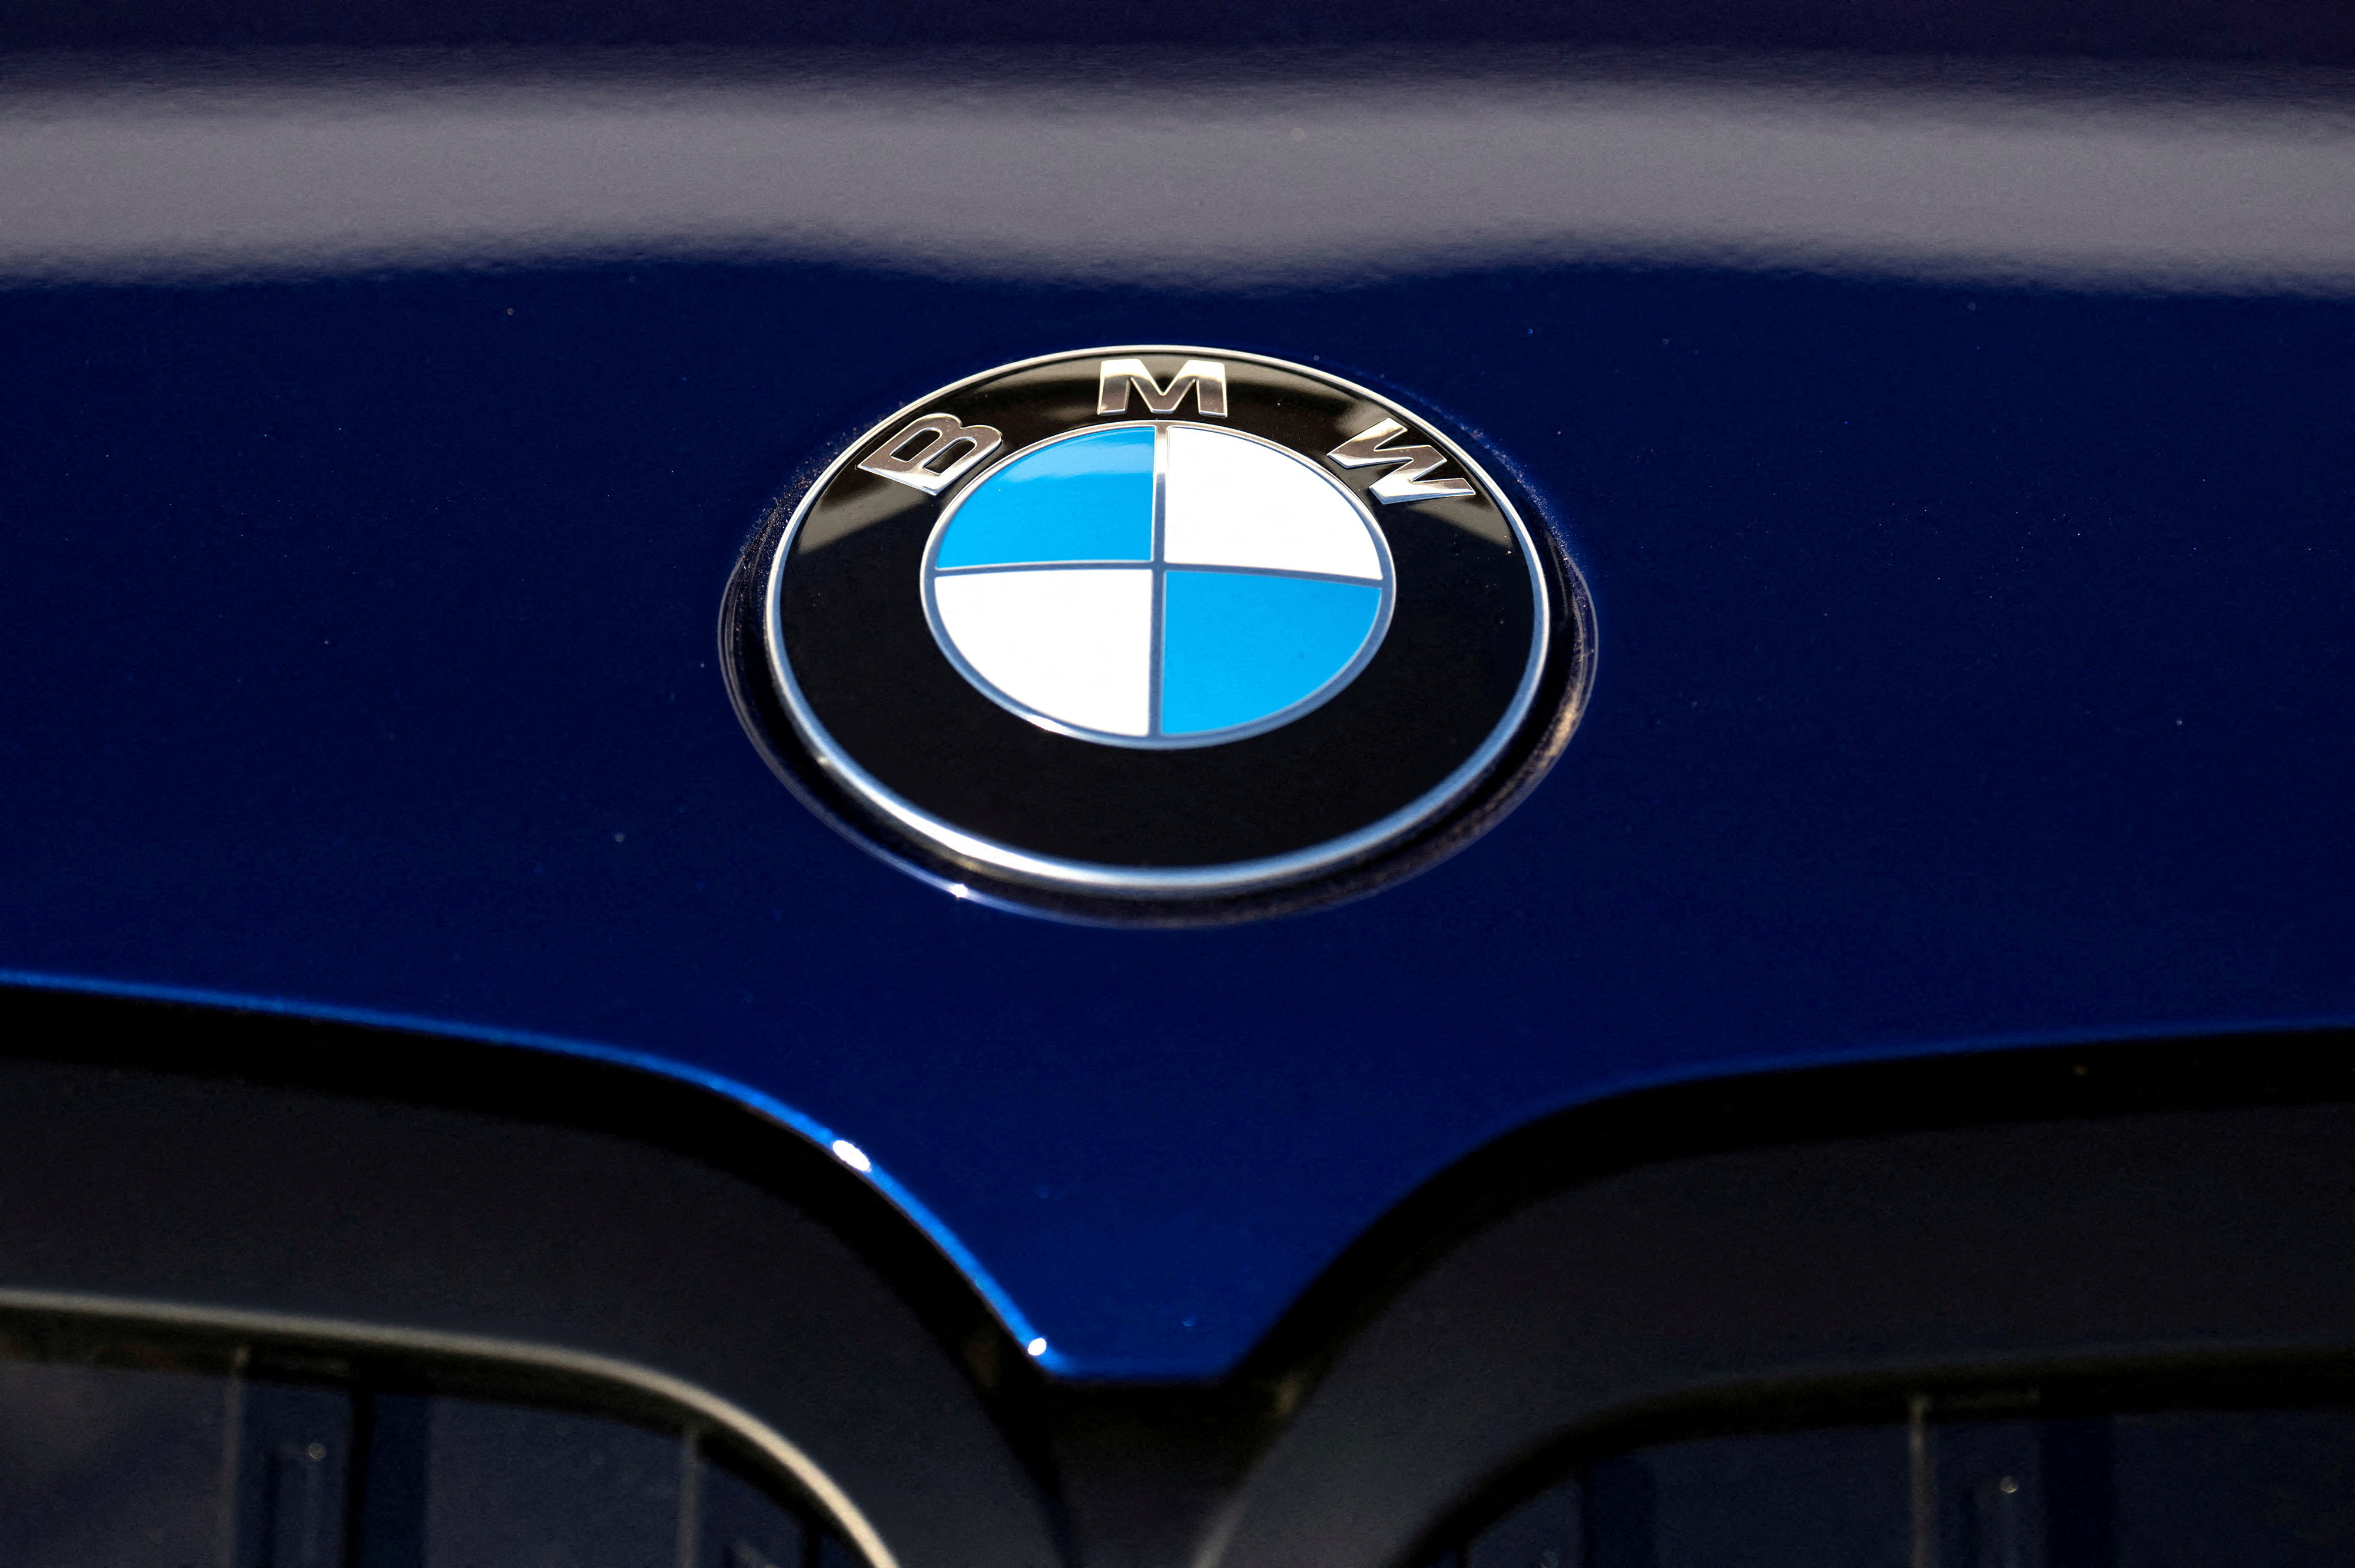 BMW expected to outline electrification plans in United States